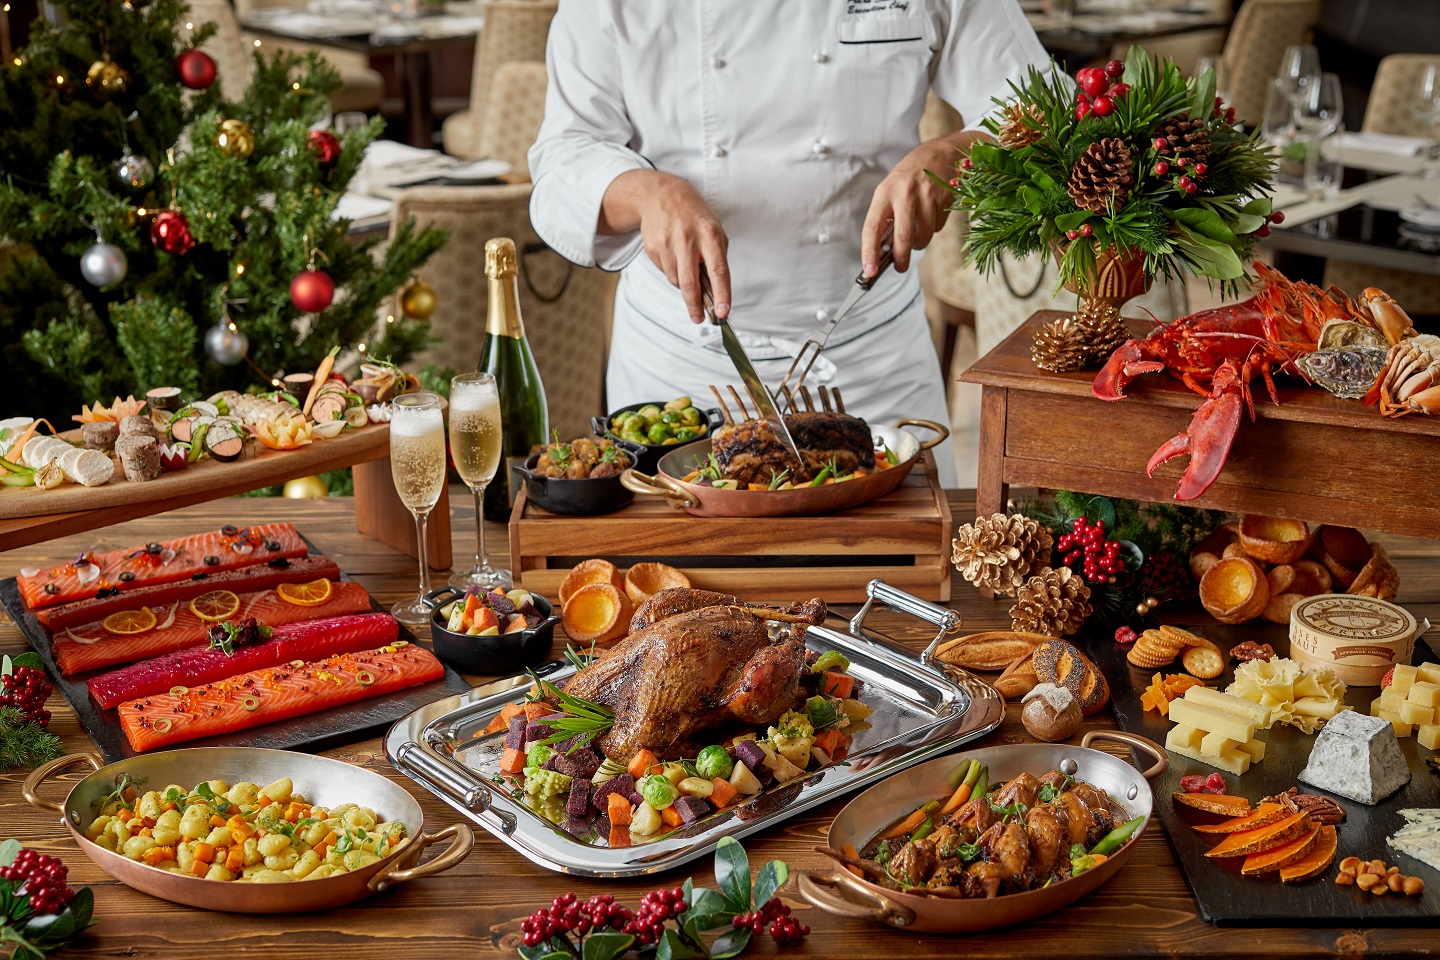 10 best hotel and restaurant dining deals for Christmas 2019 | Options